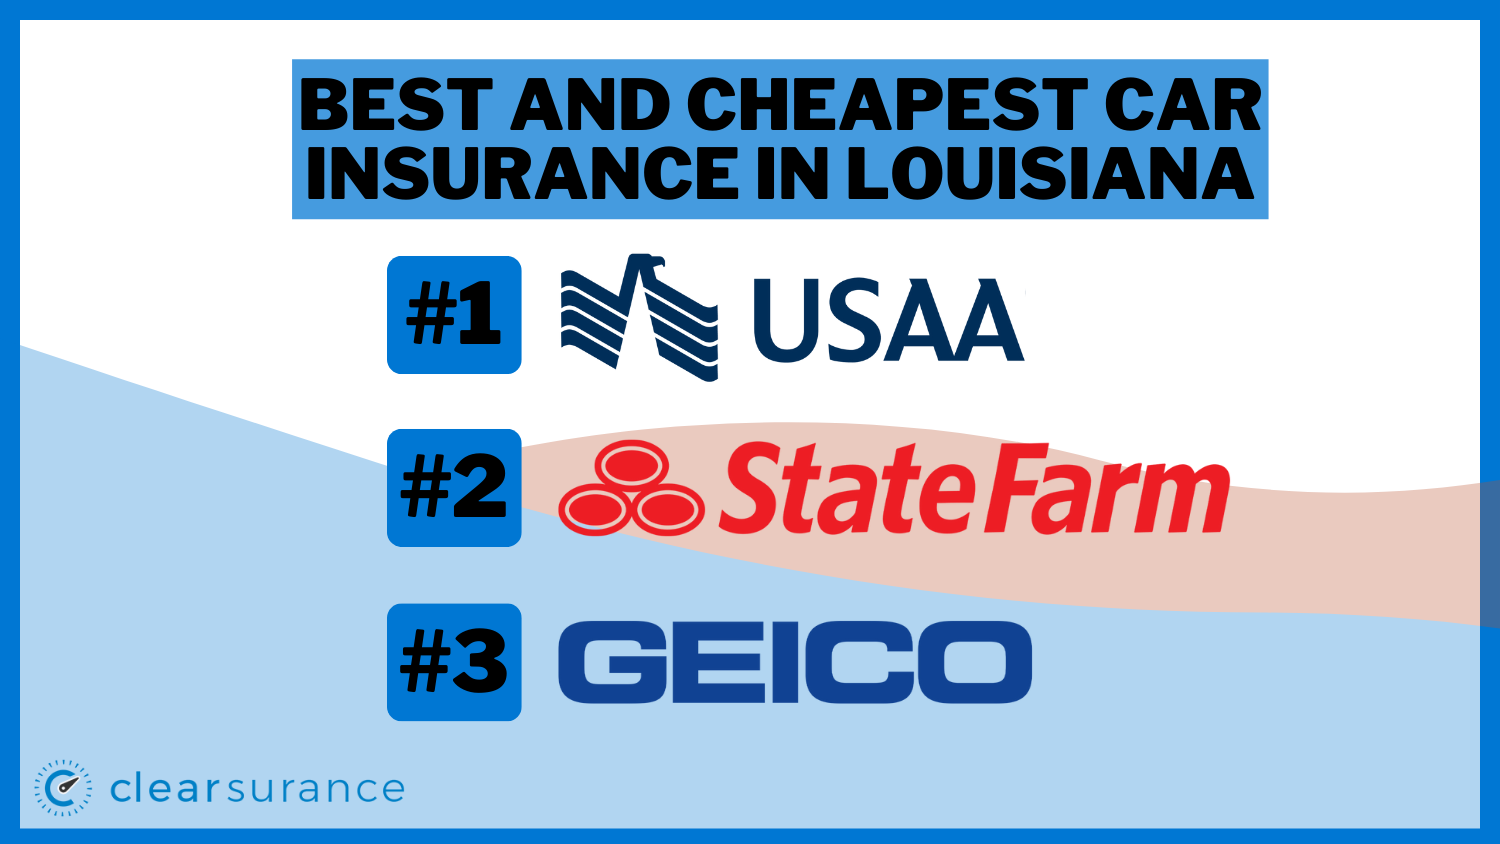 Best and Cheapest Car Insurance in Louisiana